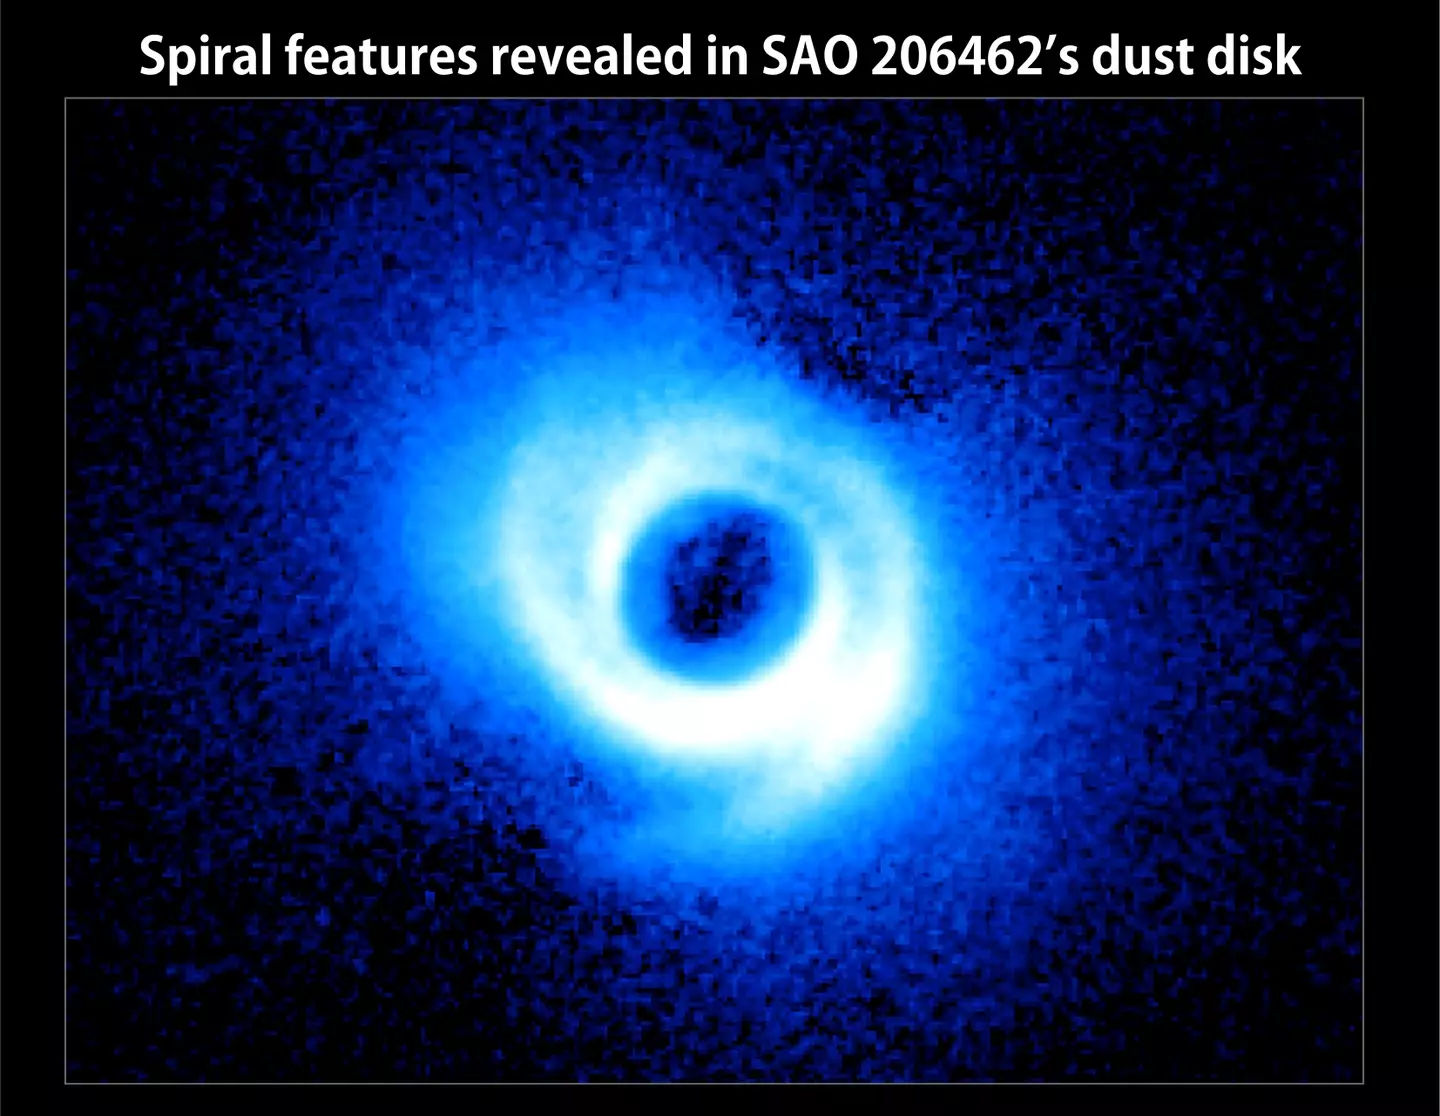 Two spiral arms emerge from the gas-rich disk around SAO 206462, a young star in the constellation Lupus.